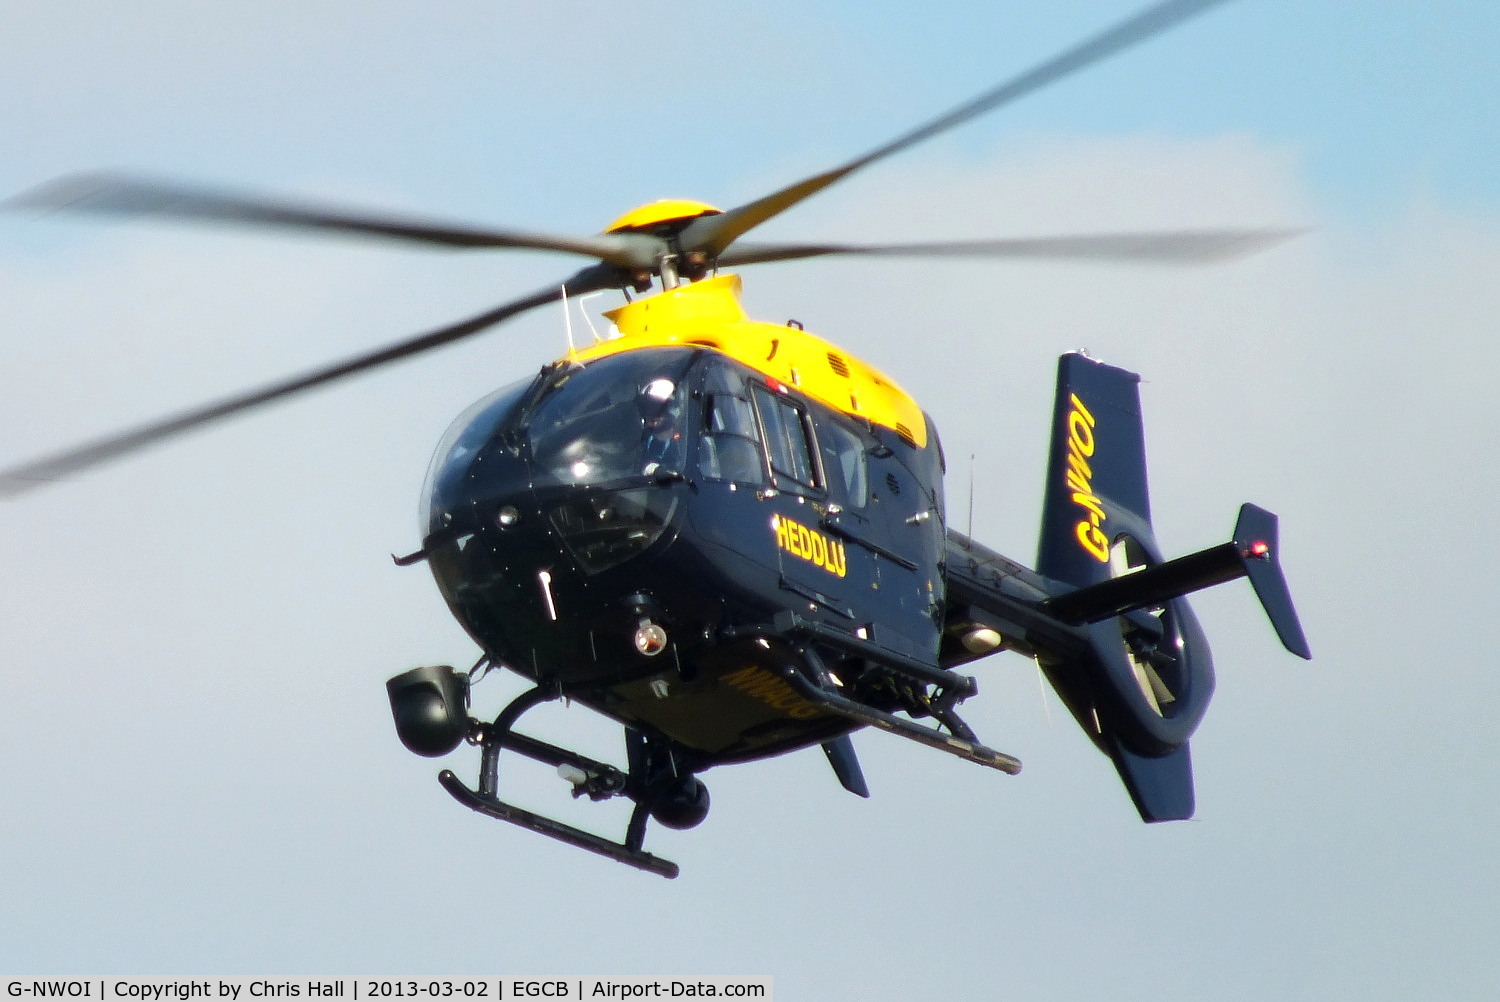 G-NWOI, 2010 Eurocopter EC-135P-2+ C/N 0887, former North Wales Police EC135, now registered to West Yorkshire Police.